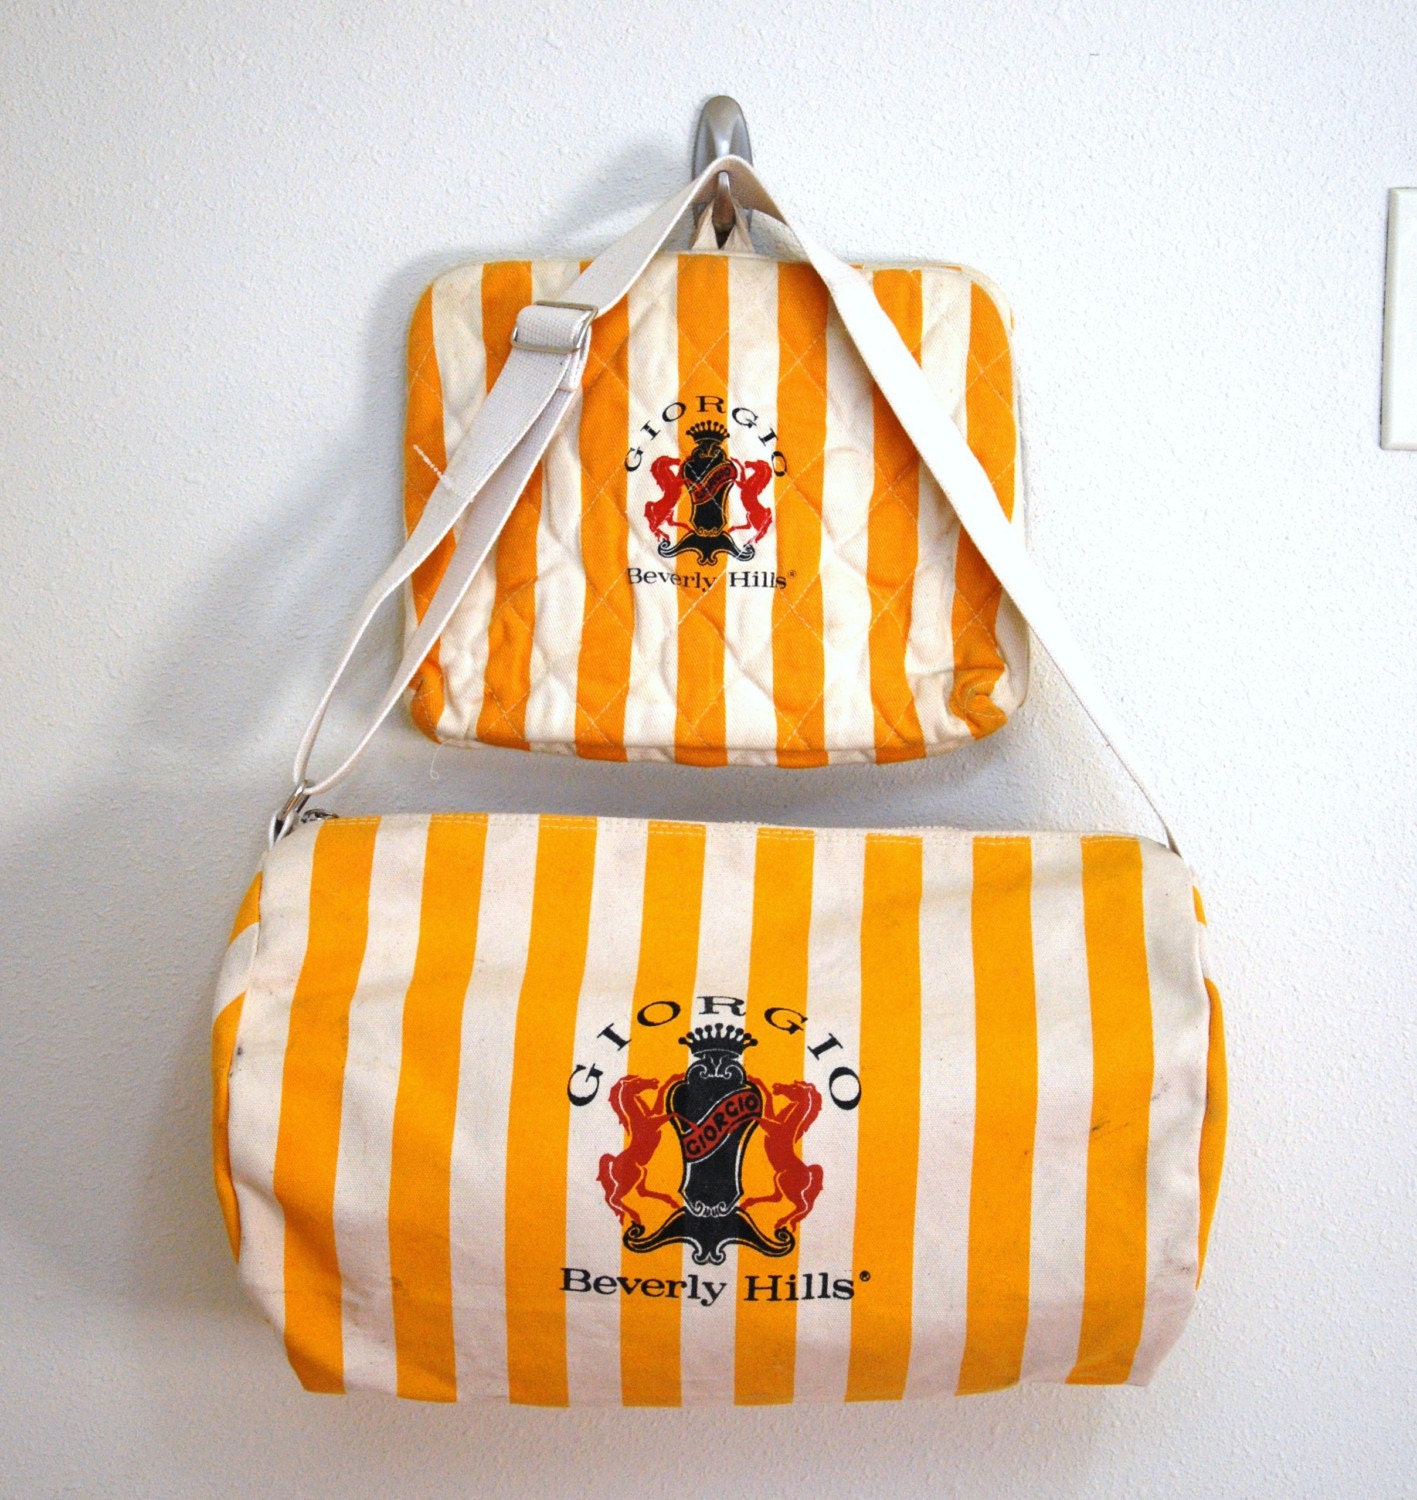 GIORGIO BEVERLY HILLS TRAVEL BAG SET / Vintage Yellow and